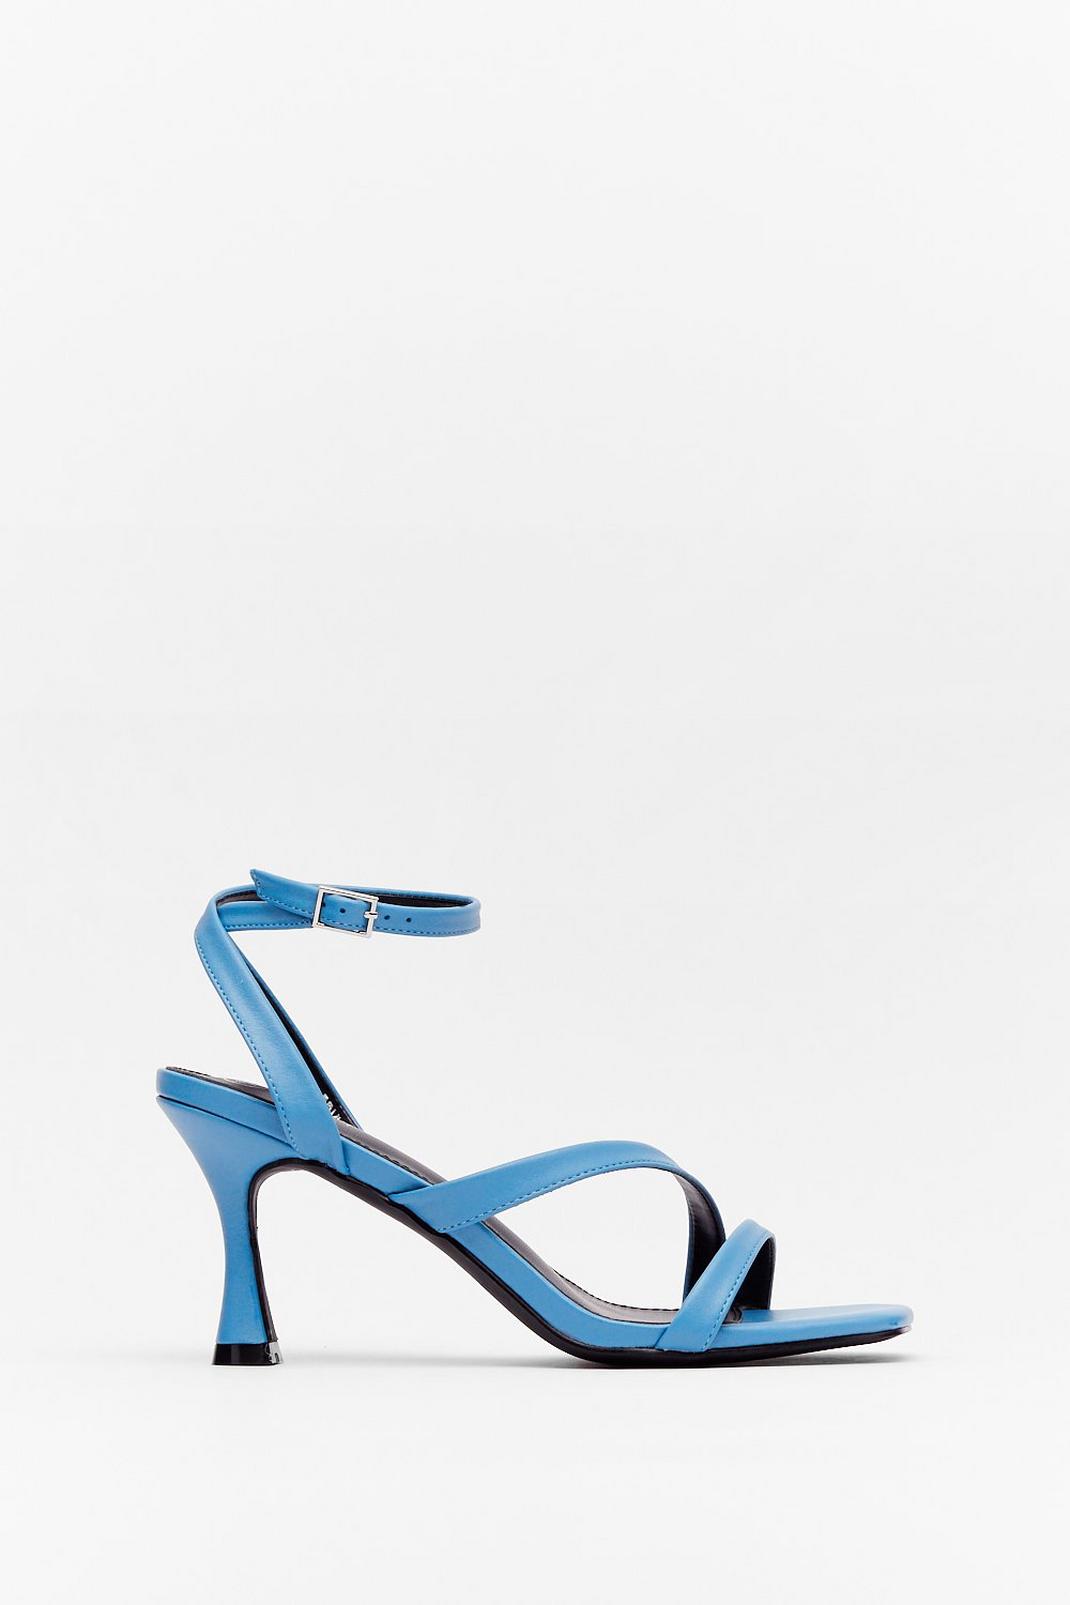 Louis Heel the Power Strappy Sandals | Nasty Gal